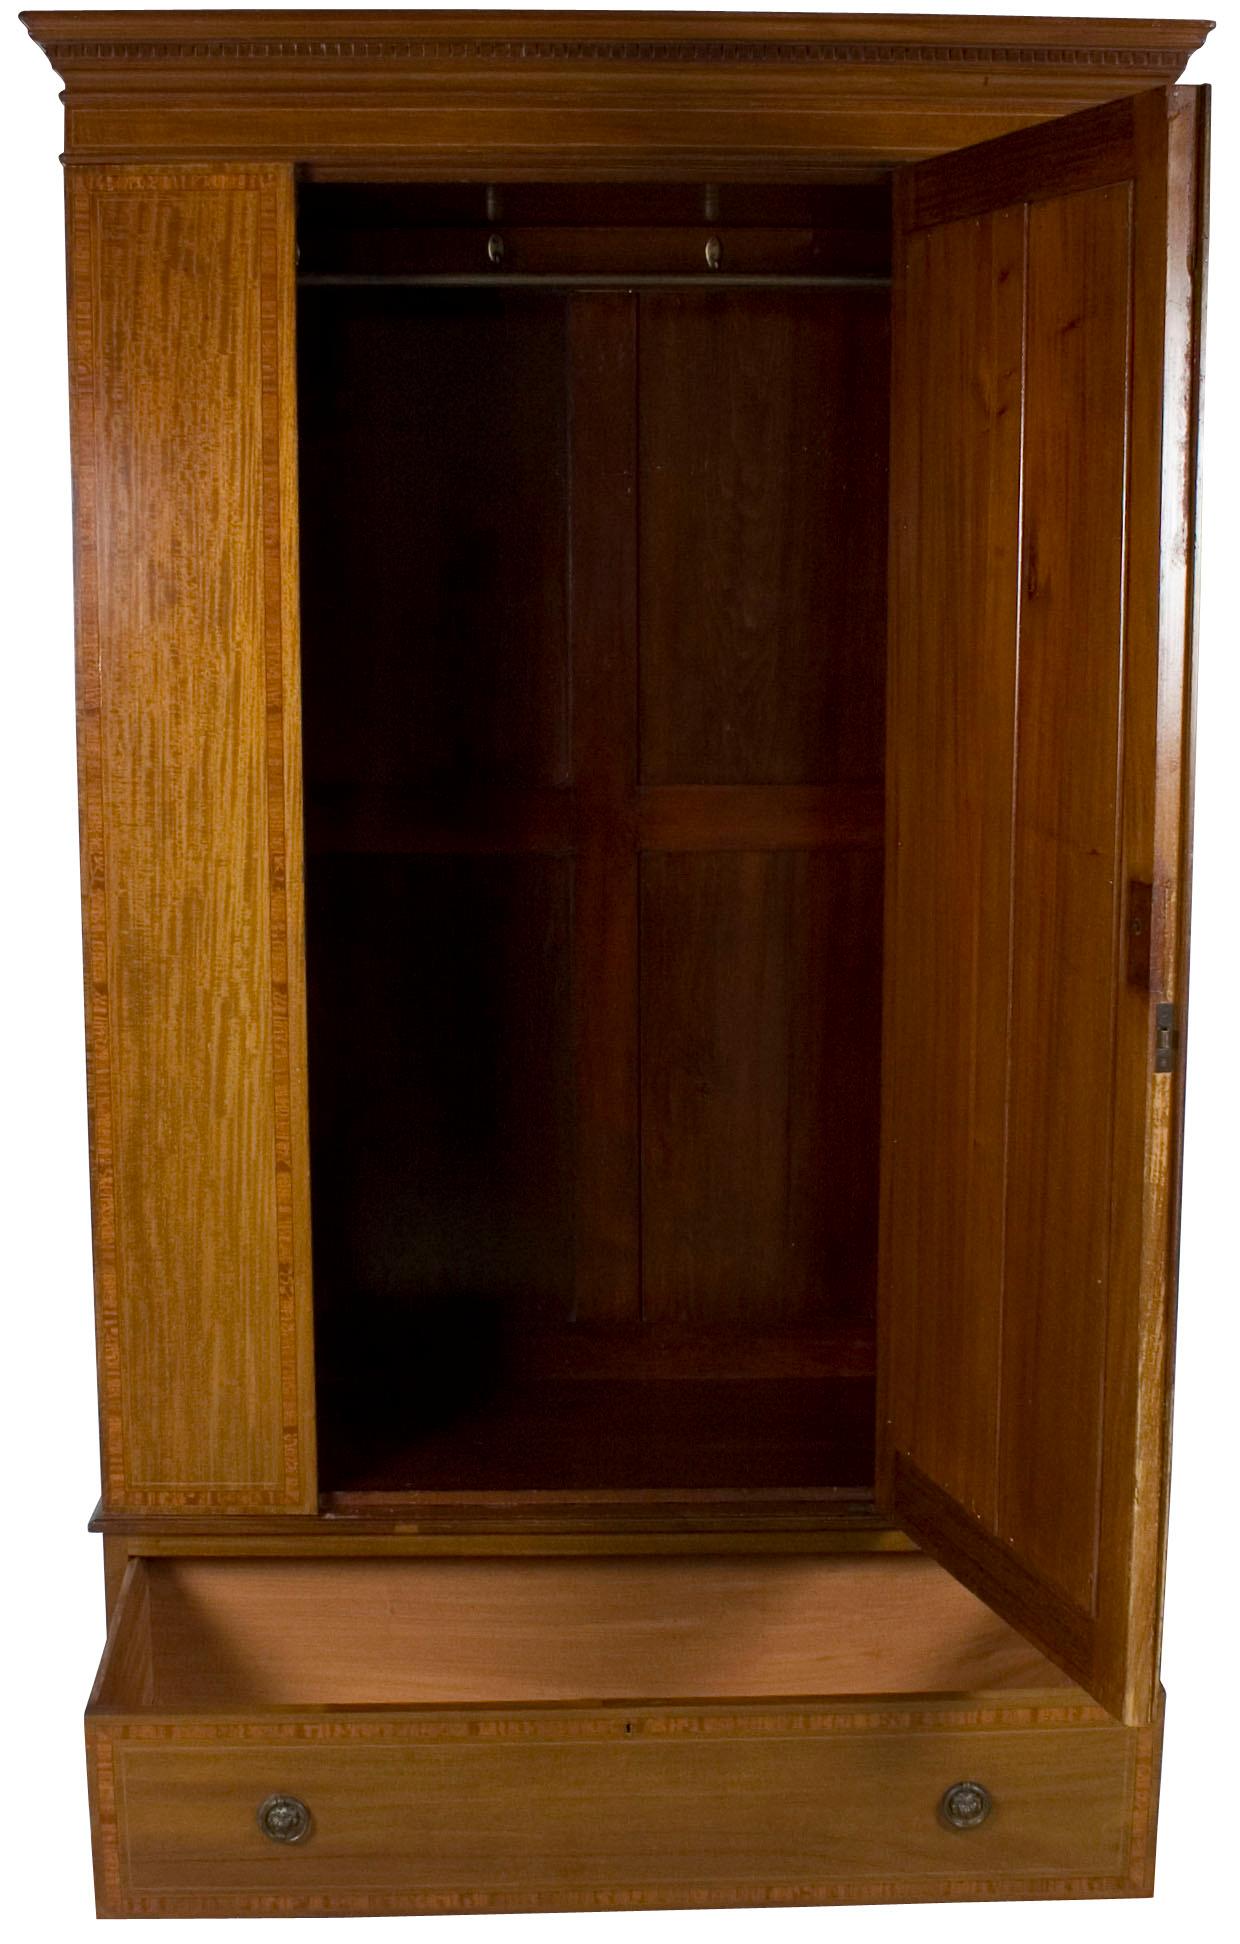 Made in England during the Edwardian period (circa 1910), this gorgeous antique wardrobe provides storage for a variety of needs.
Featuring a mirrored door with rectangular panels, this mahogany wardrobe compliments any decor. Inside is a large